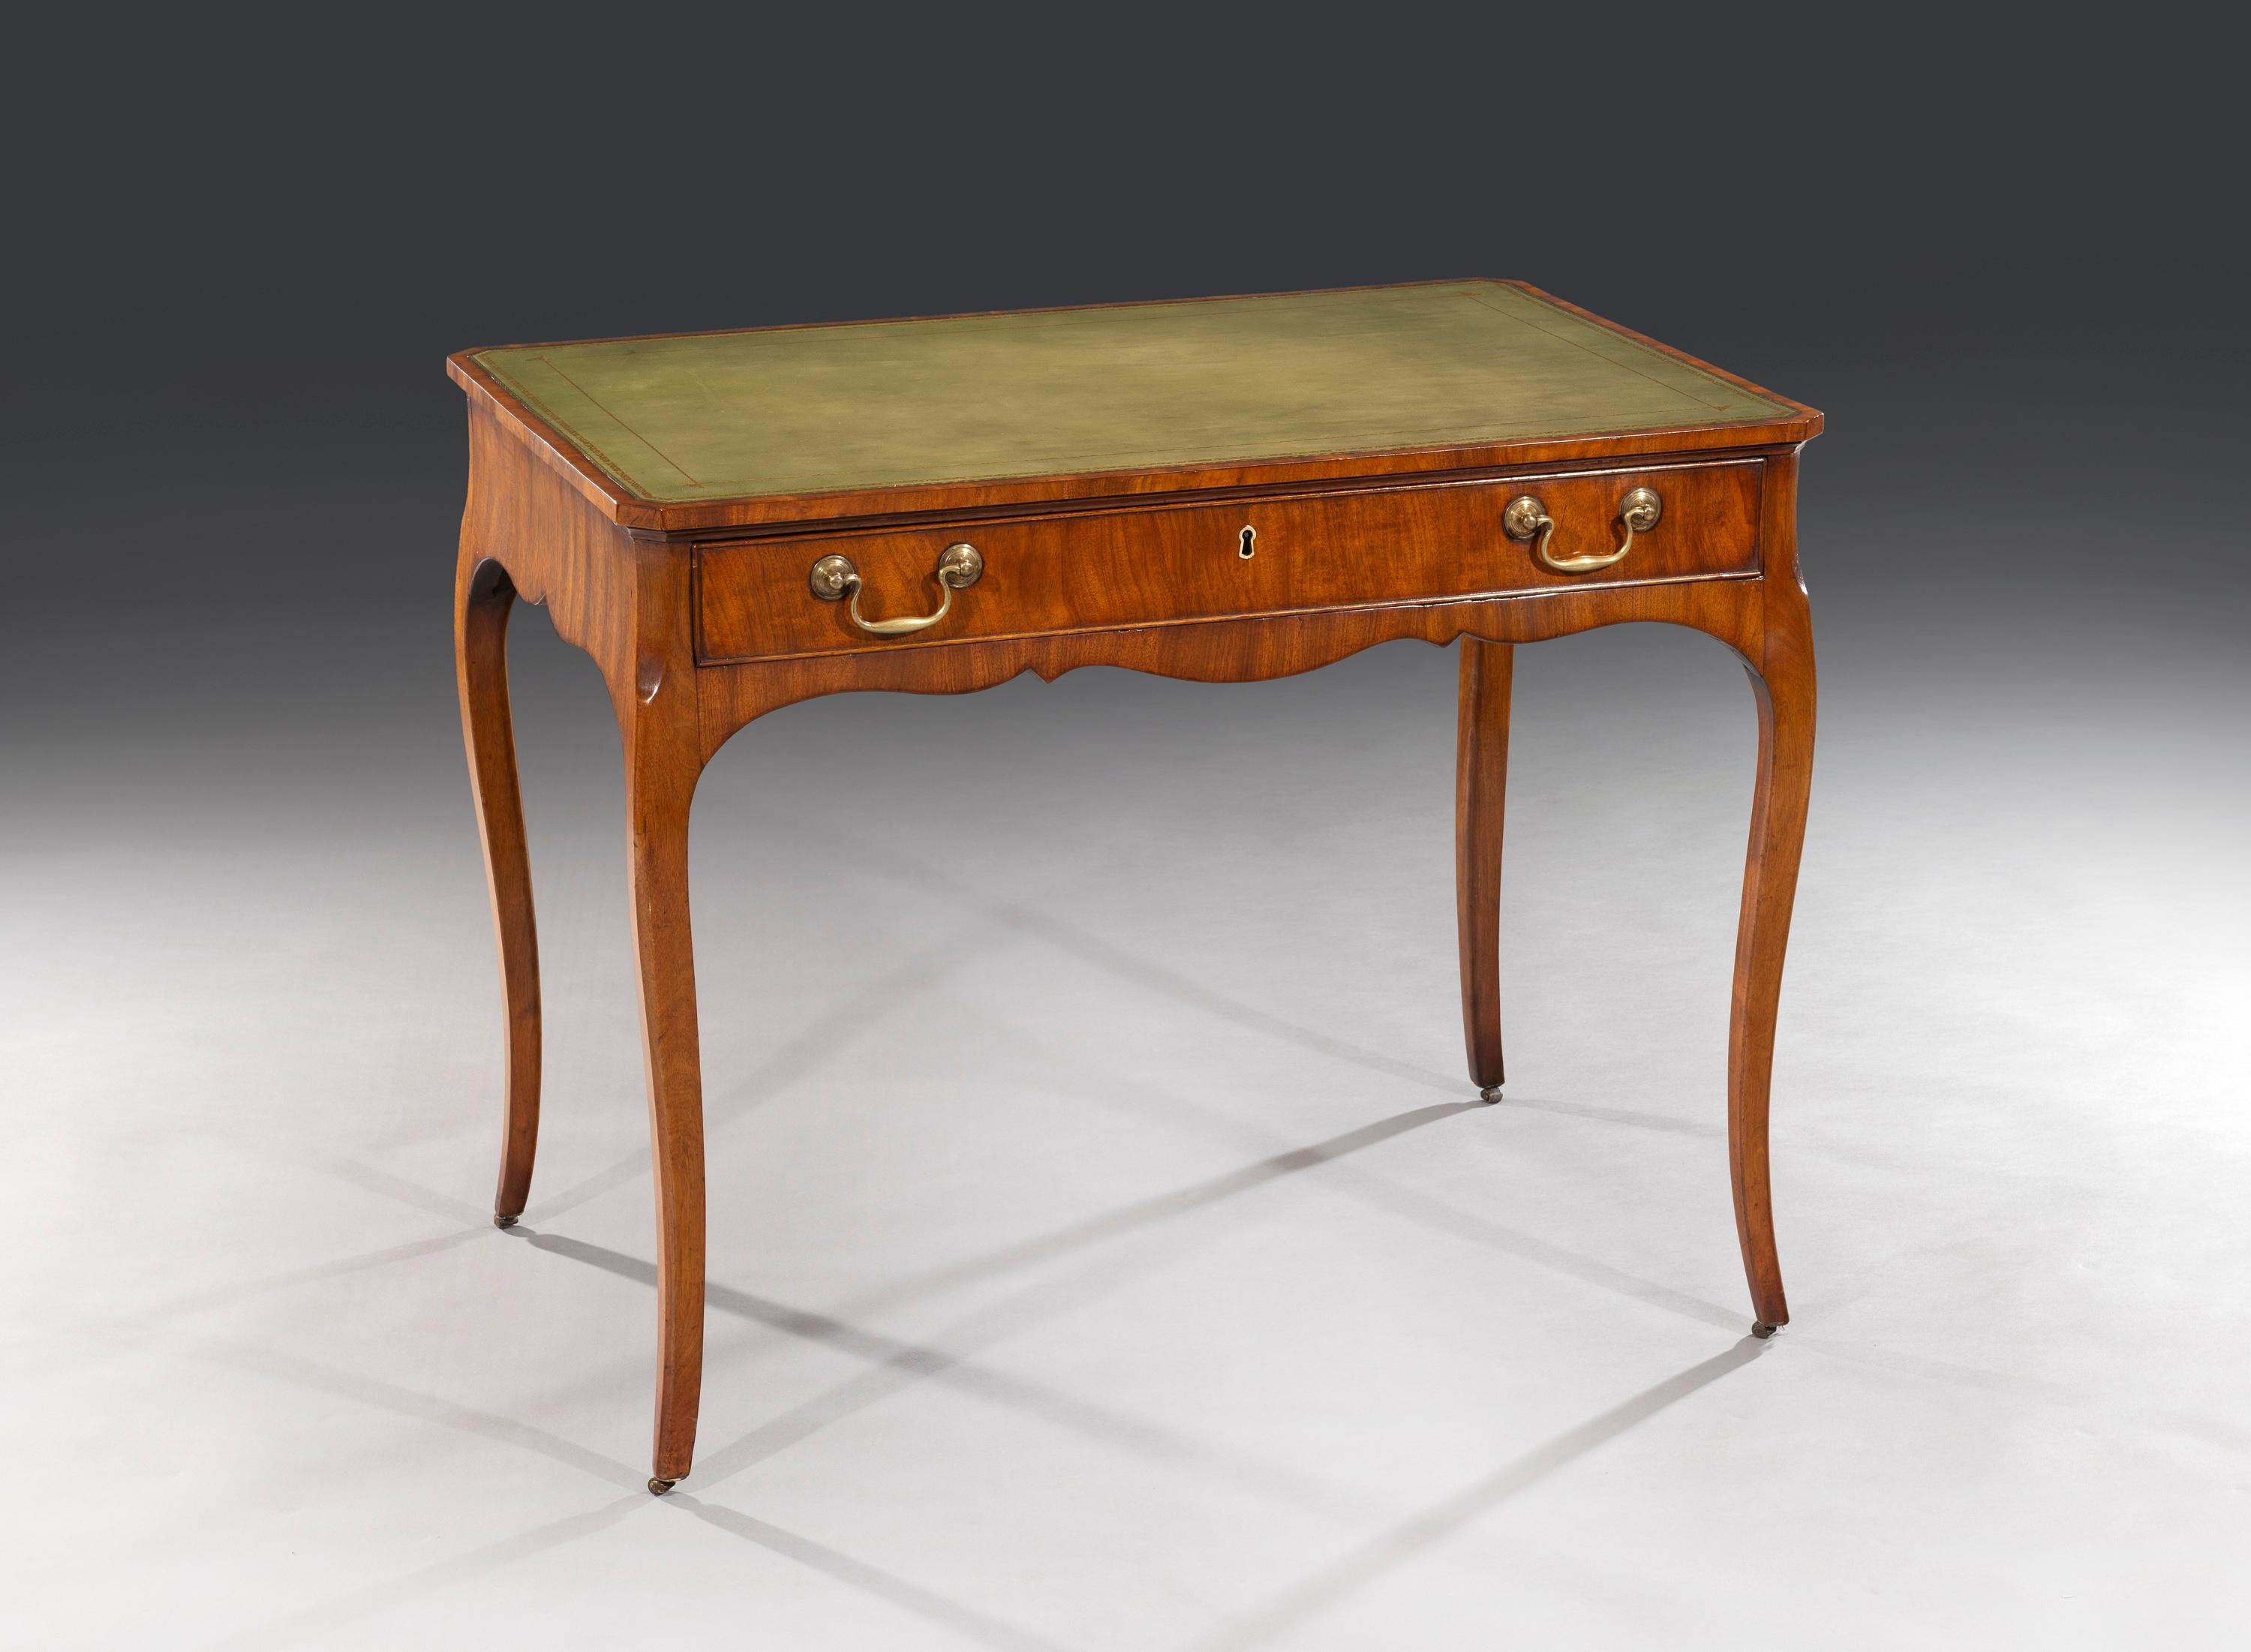 Small 18th Century George III Hepplewhite Period Mahogany Writing Table In Good Condition For Sale In Bradford on Avon, GB